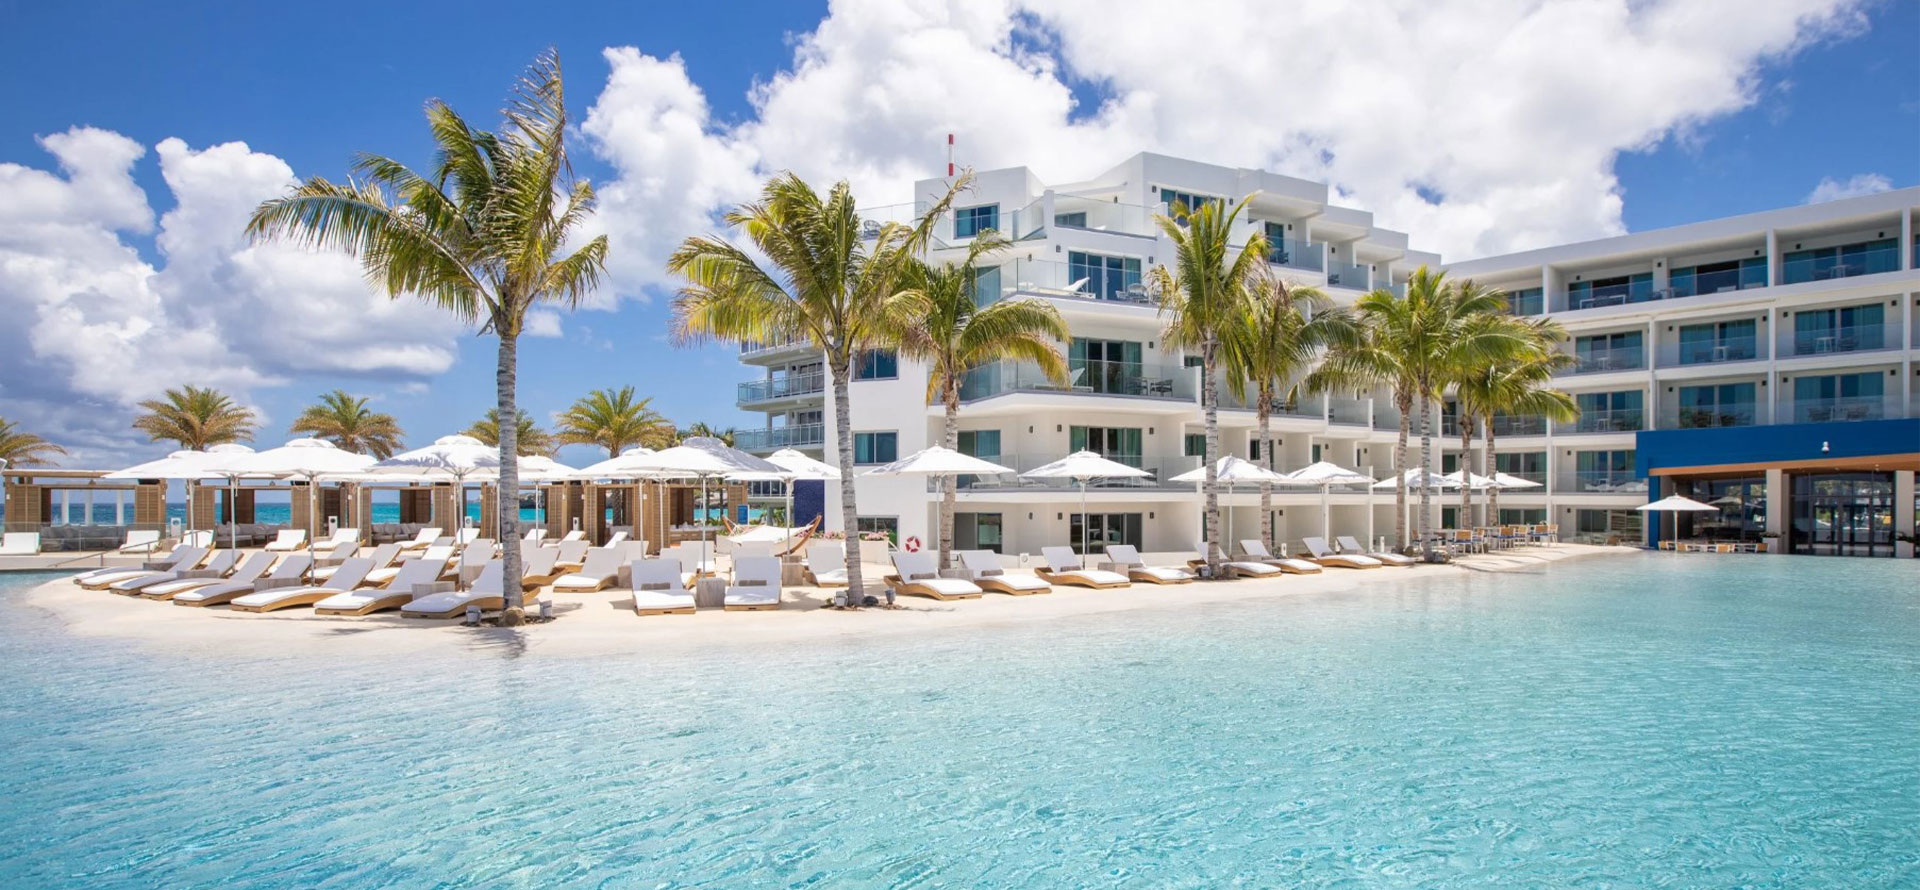 St. Maarten All-Inclusive Family Resorts and swimming pool.